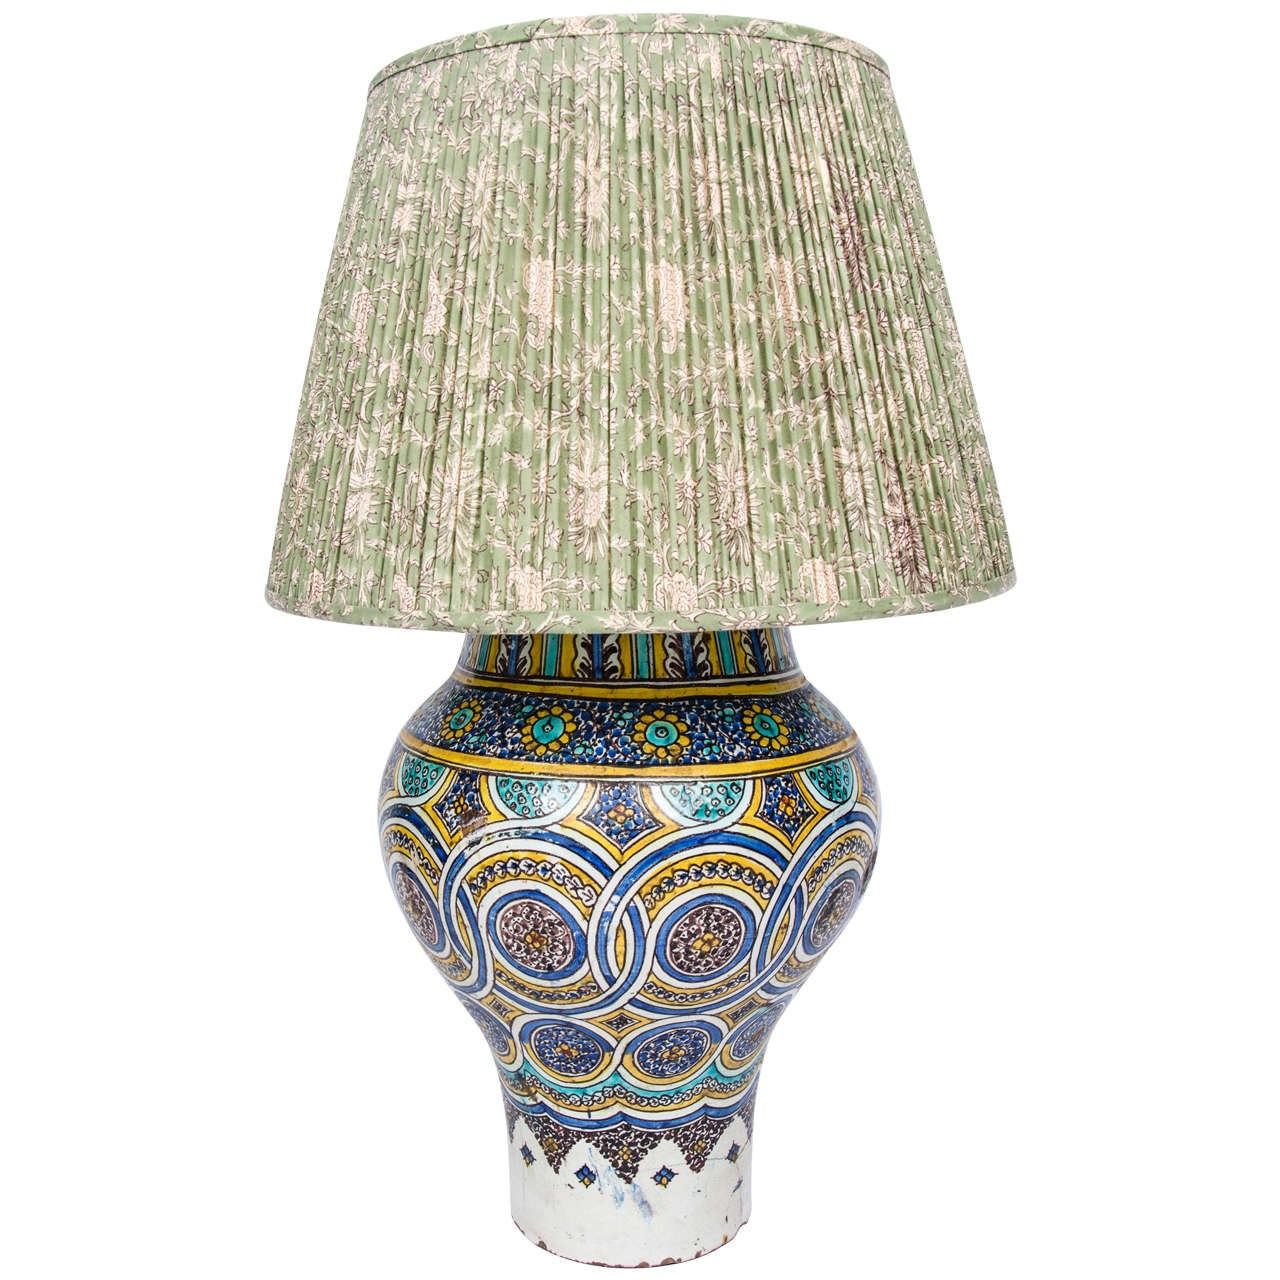 A 19th century Moroccan vase as a lamp